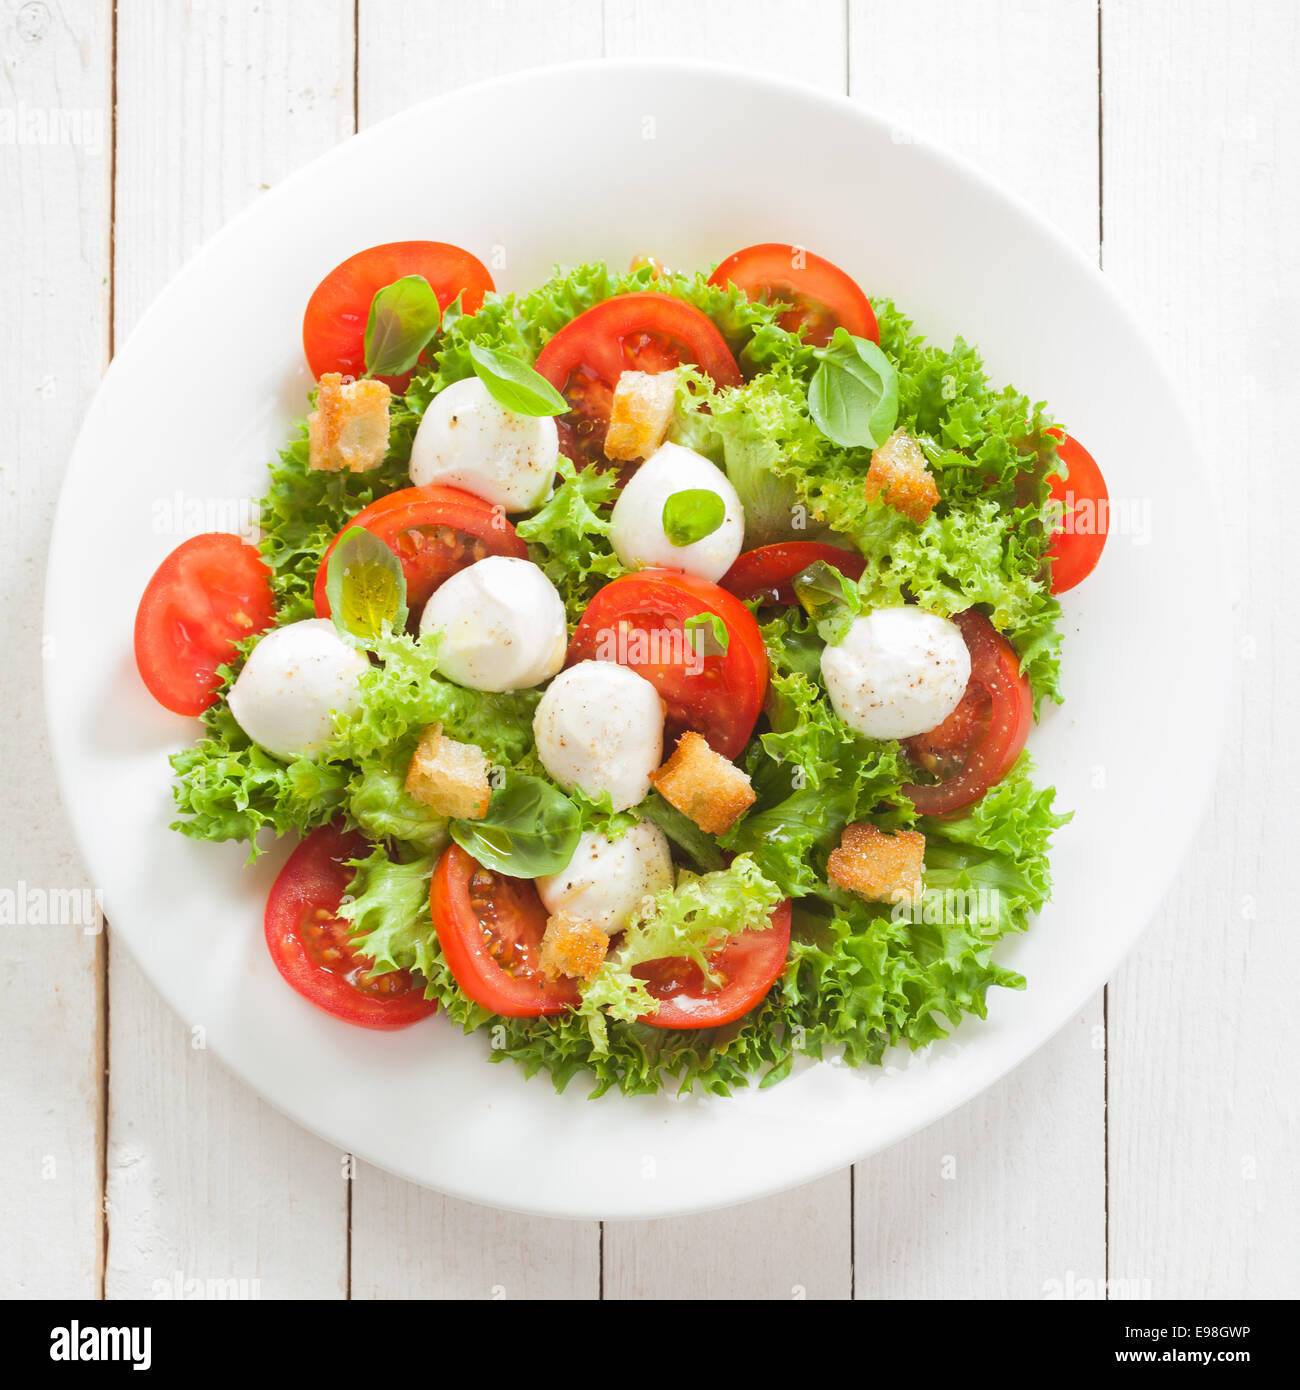 Italian mozzarella cheese and tomato salad with tomatoes and crisp crunchy fried bread cretins, view from above on a plate on white wooden boards, square format Stock Photo